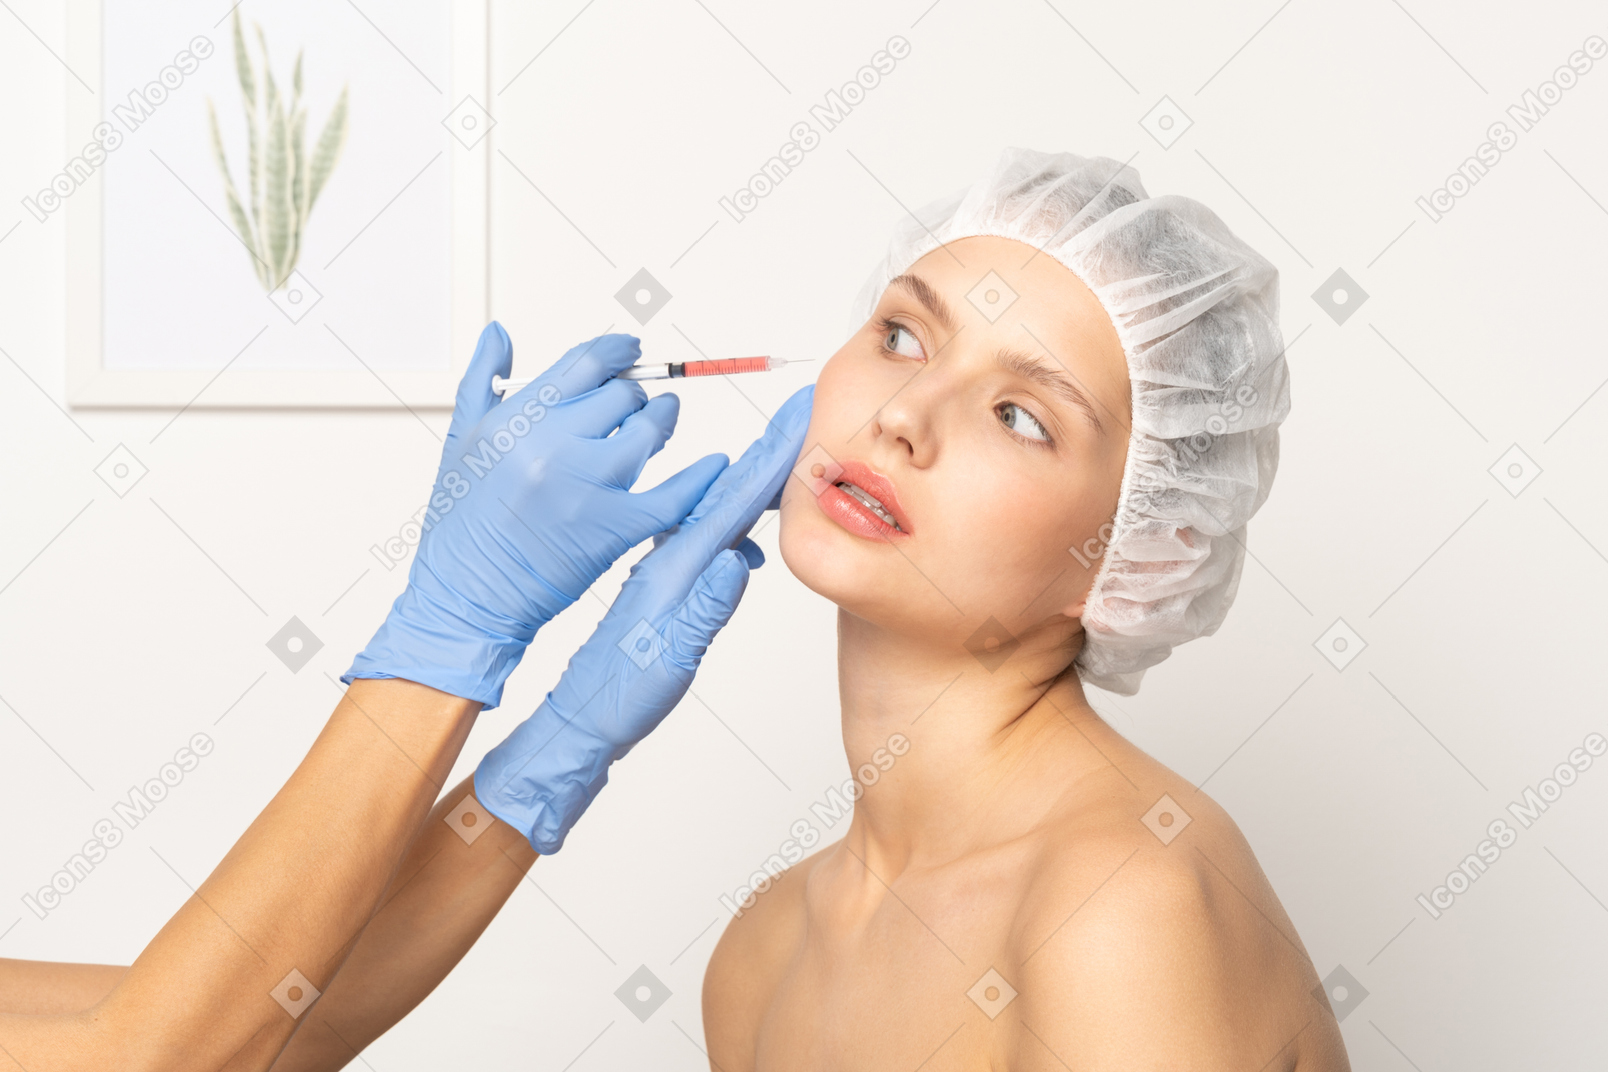 Woman looking scared of getting botox injection